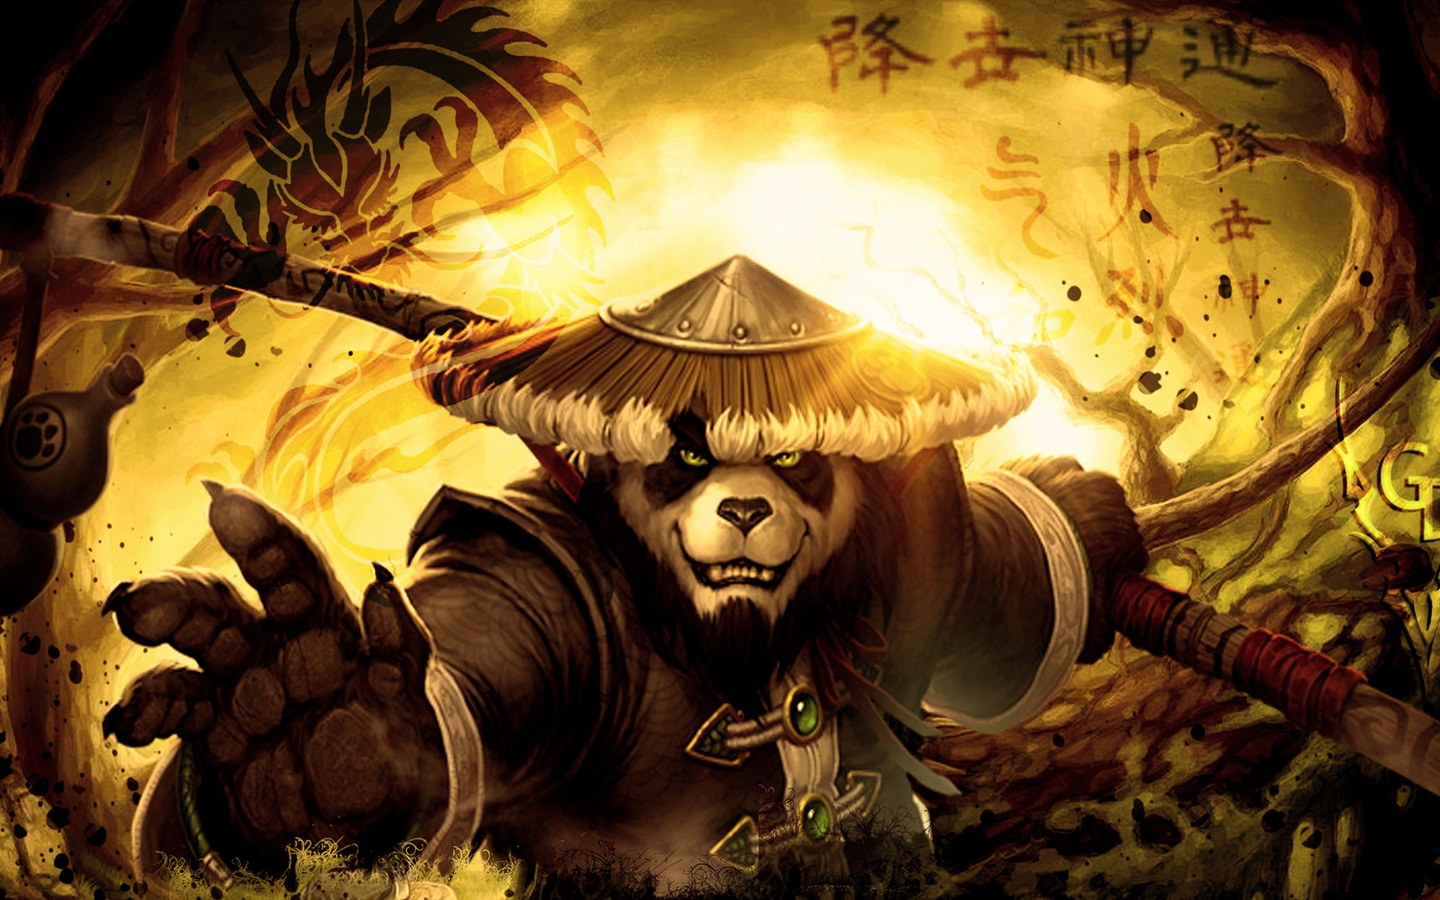 World of Warcraft: Mists of Pandaria HD wallpapers #10 - 1440x900